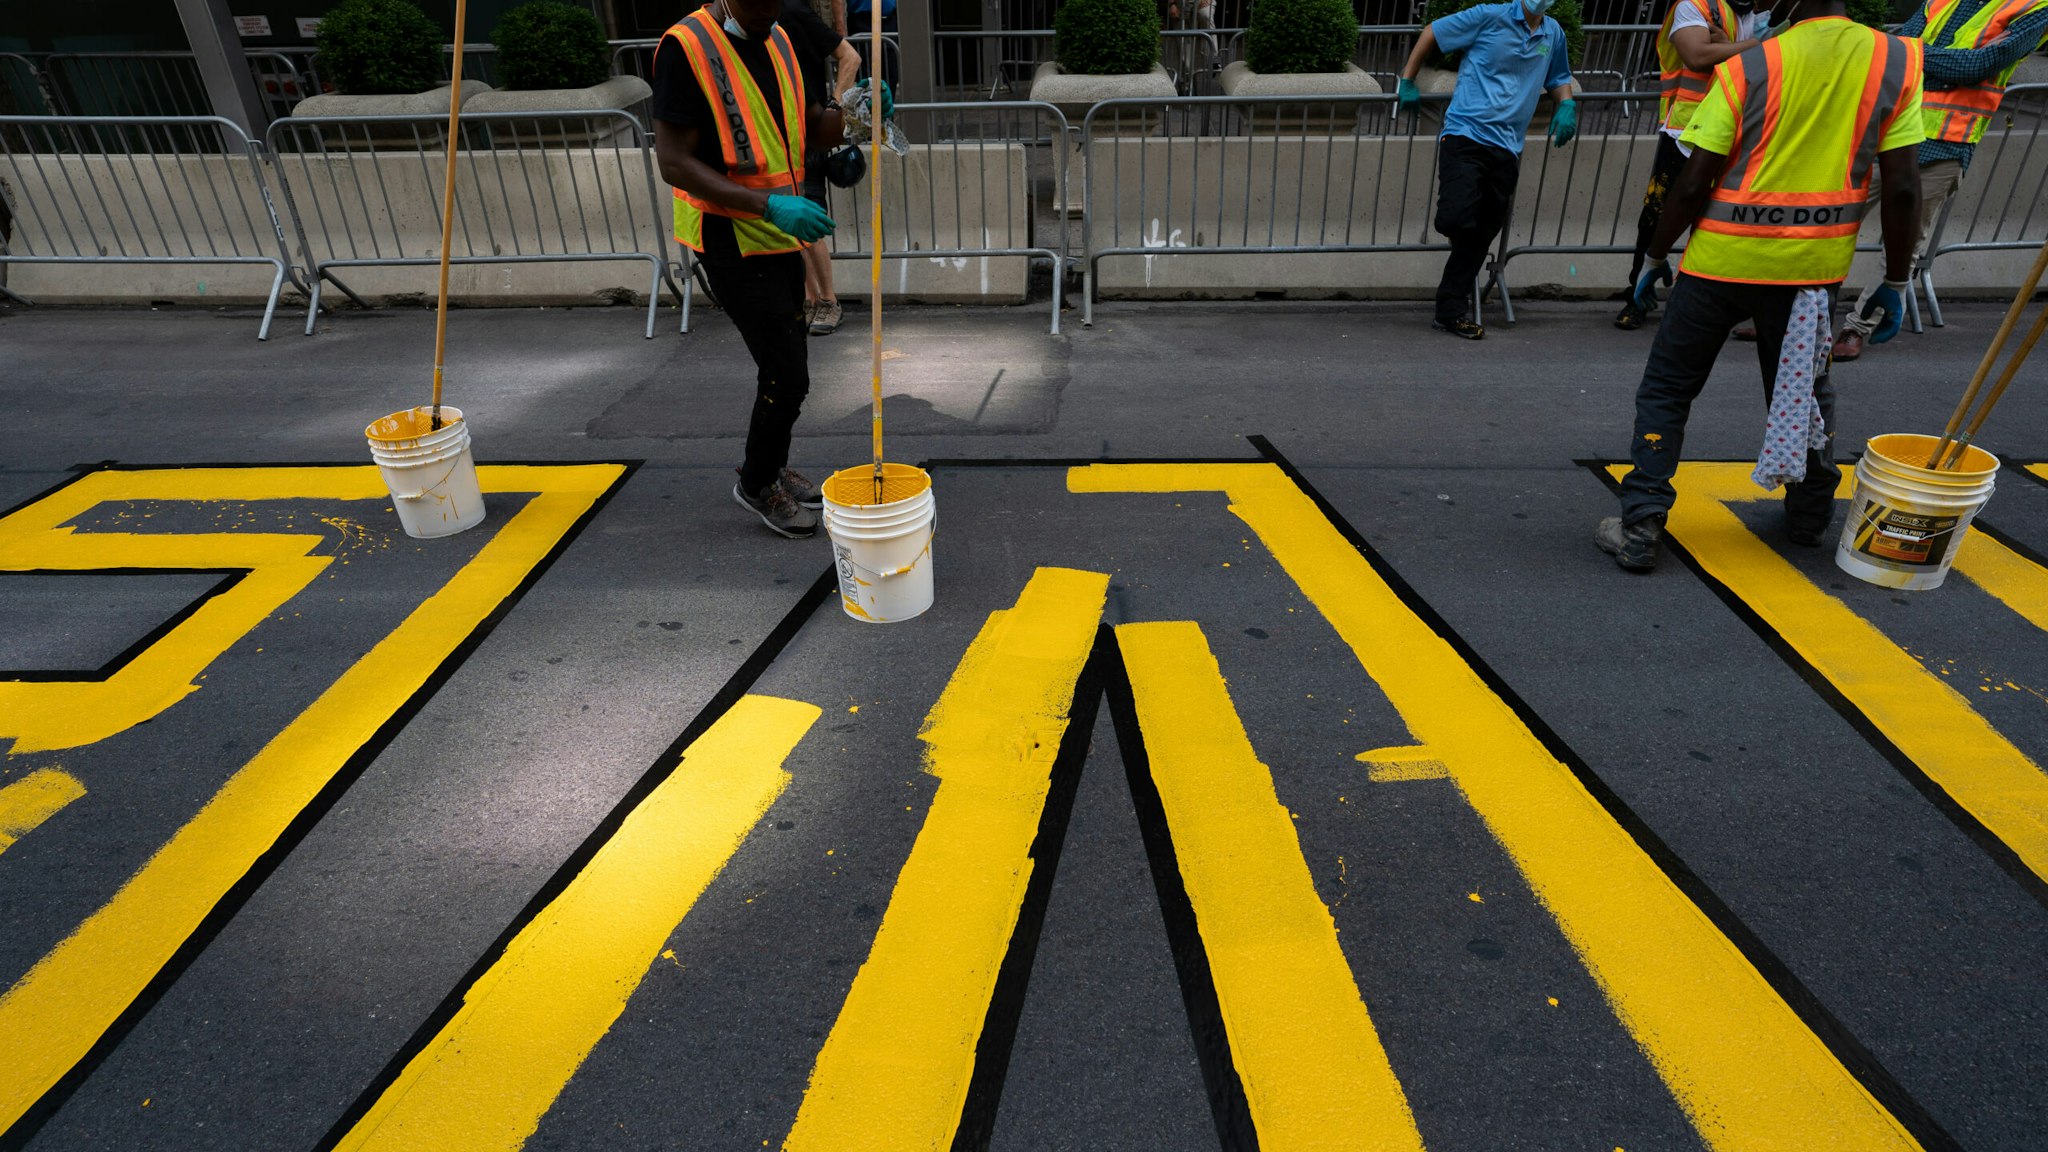 NEW YORK, NY - JULY 09: Crews begin painting a Black Lives Matter mural on Fifth Avenue directly in front of Trump Tower on July 9, 2020 in New York City. In a tweet, President Trump called the mural a "symbol of hate" and said that it would be "denigrating this luxury Avenue". (Photo by David Dee Delgado/Getty Images)